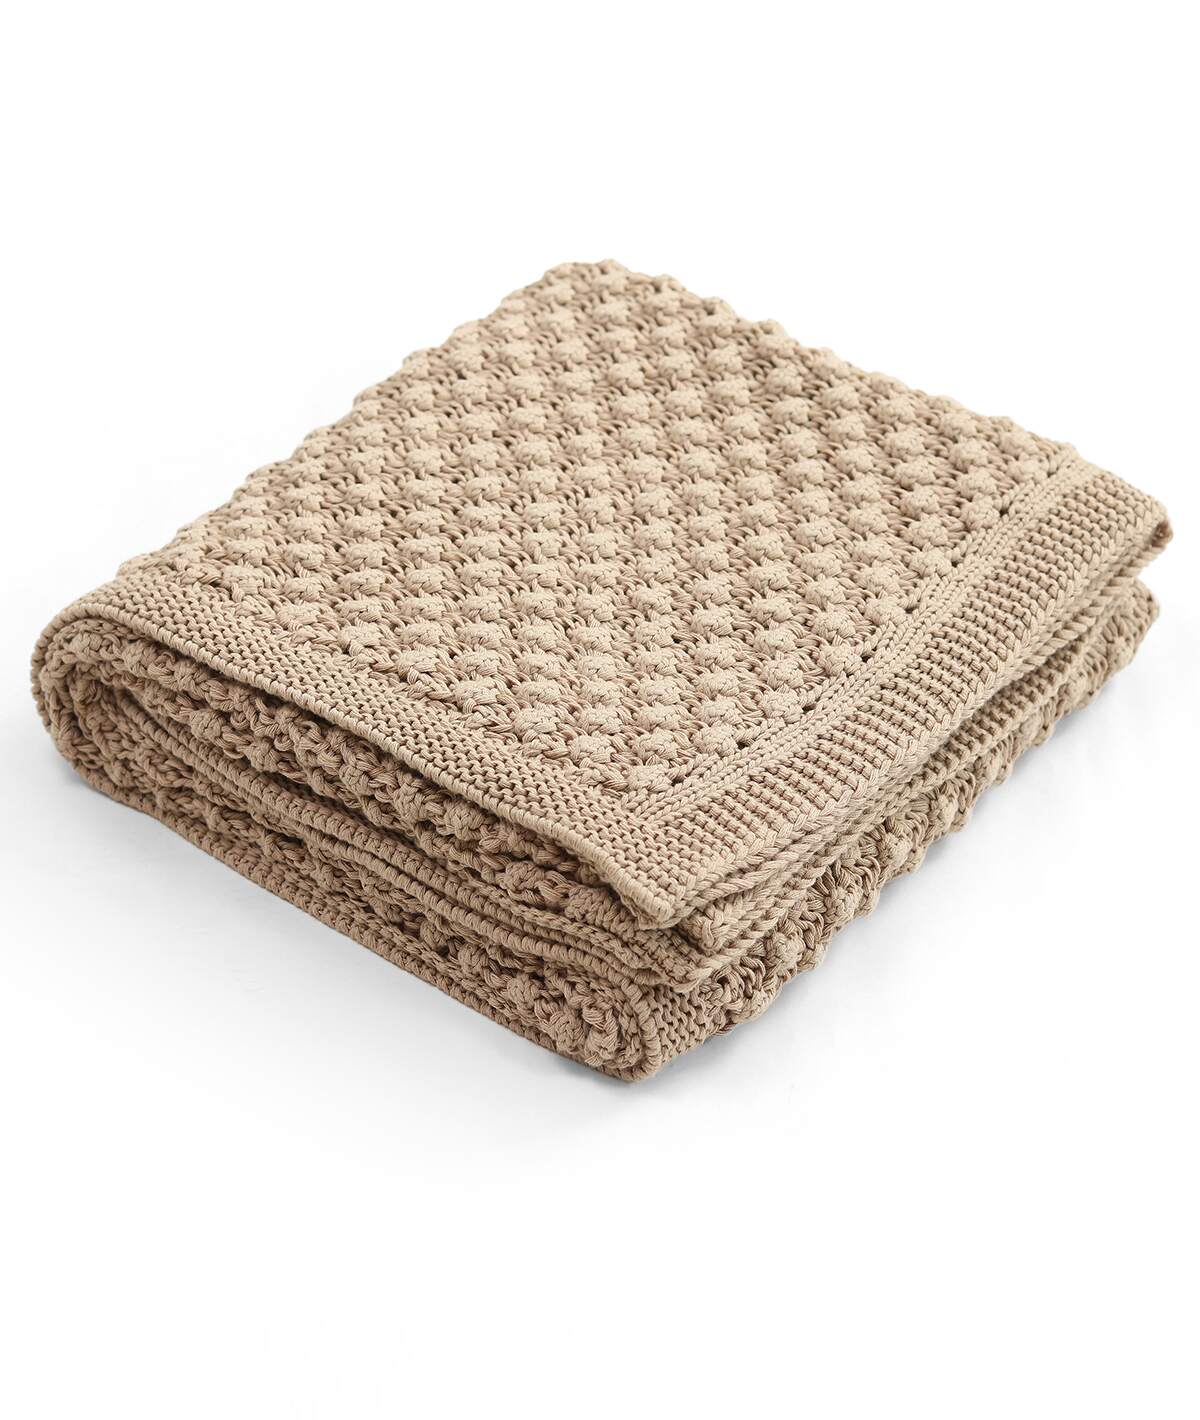 Popcorn Knit Linen Color Cotton Knitted Throw /Blanket  For Round The Year Use